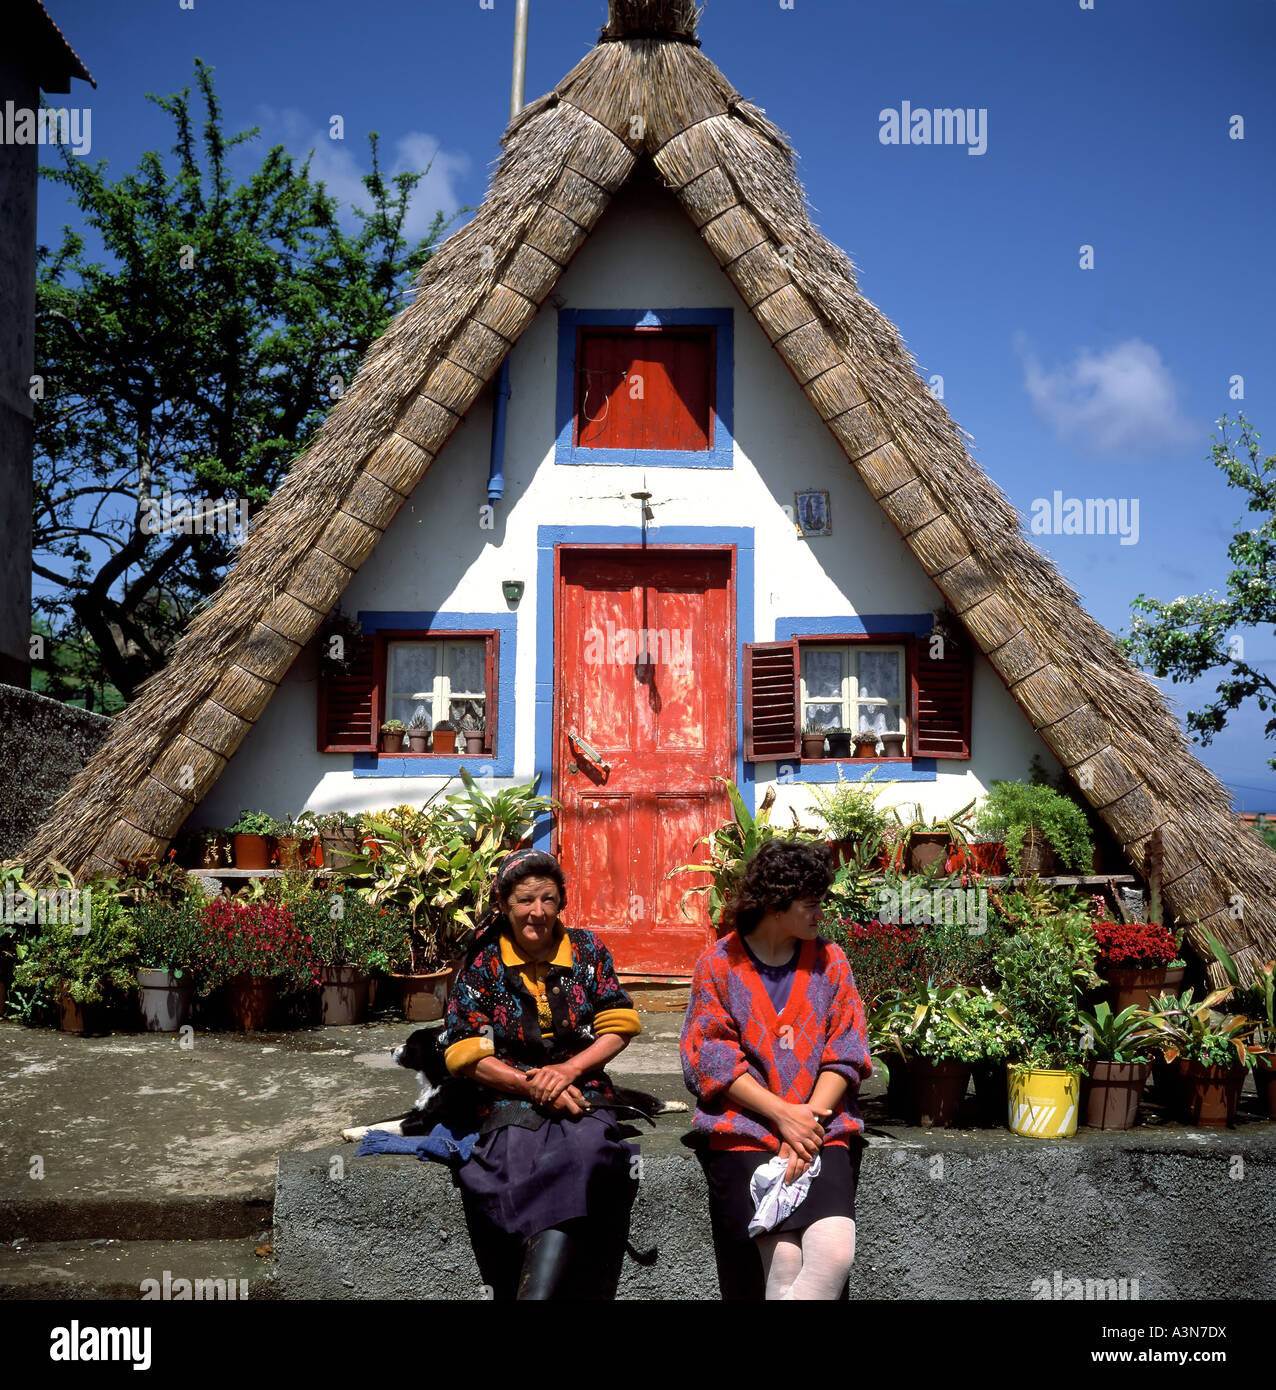 MR TWO WOMEN IN FRONT OF A  PALHEIRO  TRADITIONAL THATCHED HOUSE  SANTANA  VILLAGE  MADEIRA  ISLAND PORTUGAL Stock Photo